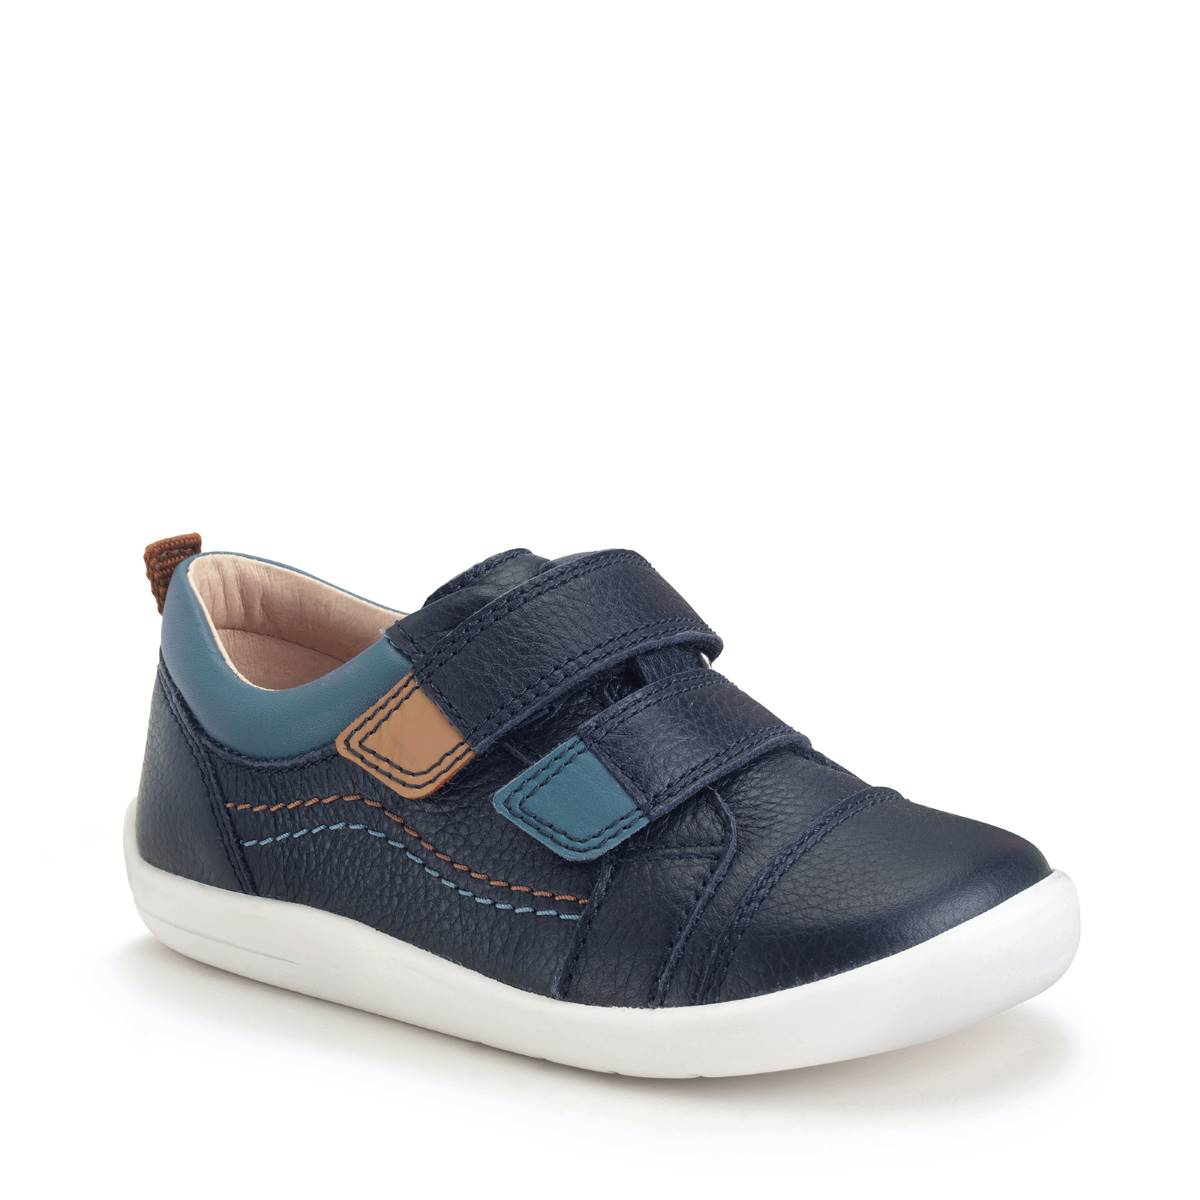 Start Rite Playhouse Clubhouse Navy leather Kids Boys Toddler Shoes 0826-96F in a Plain Leather in Size 6.5